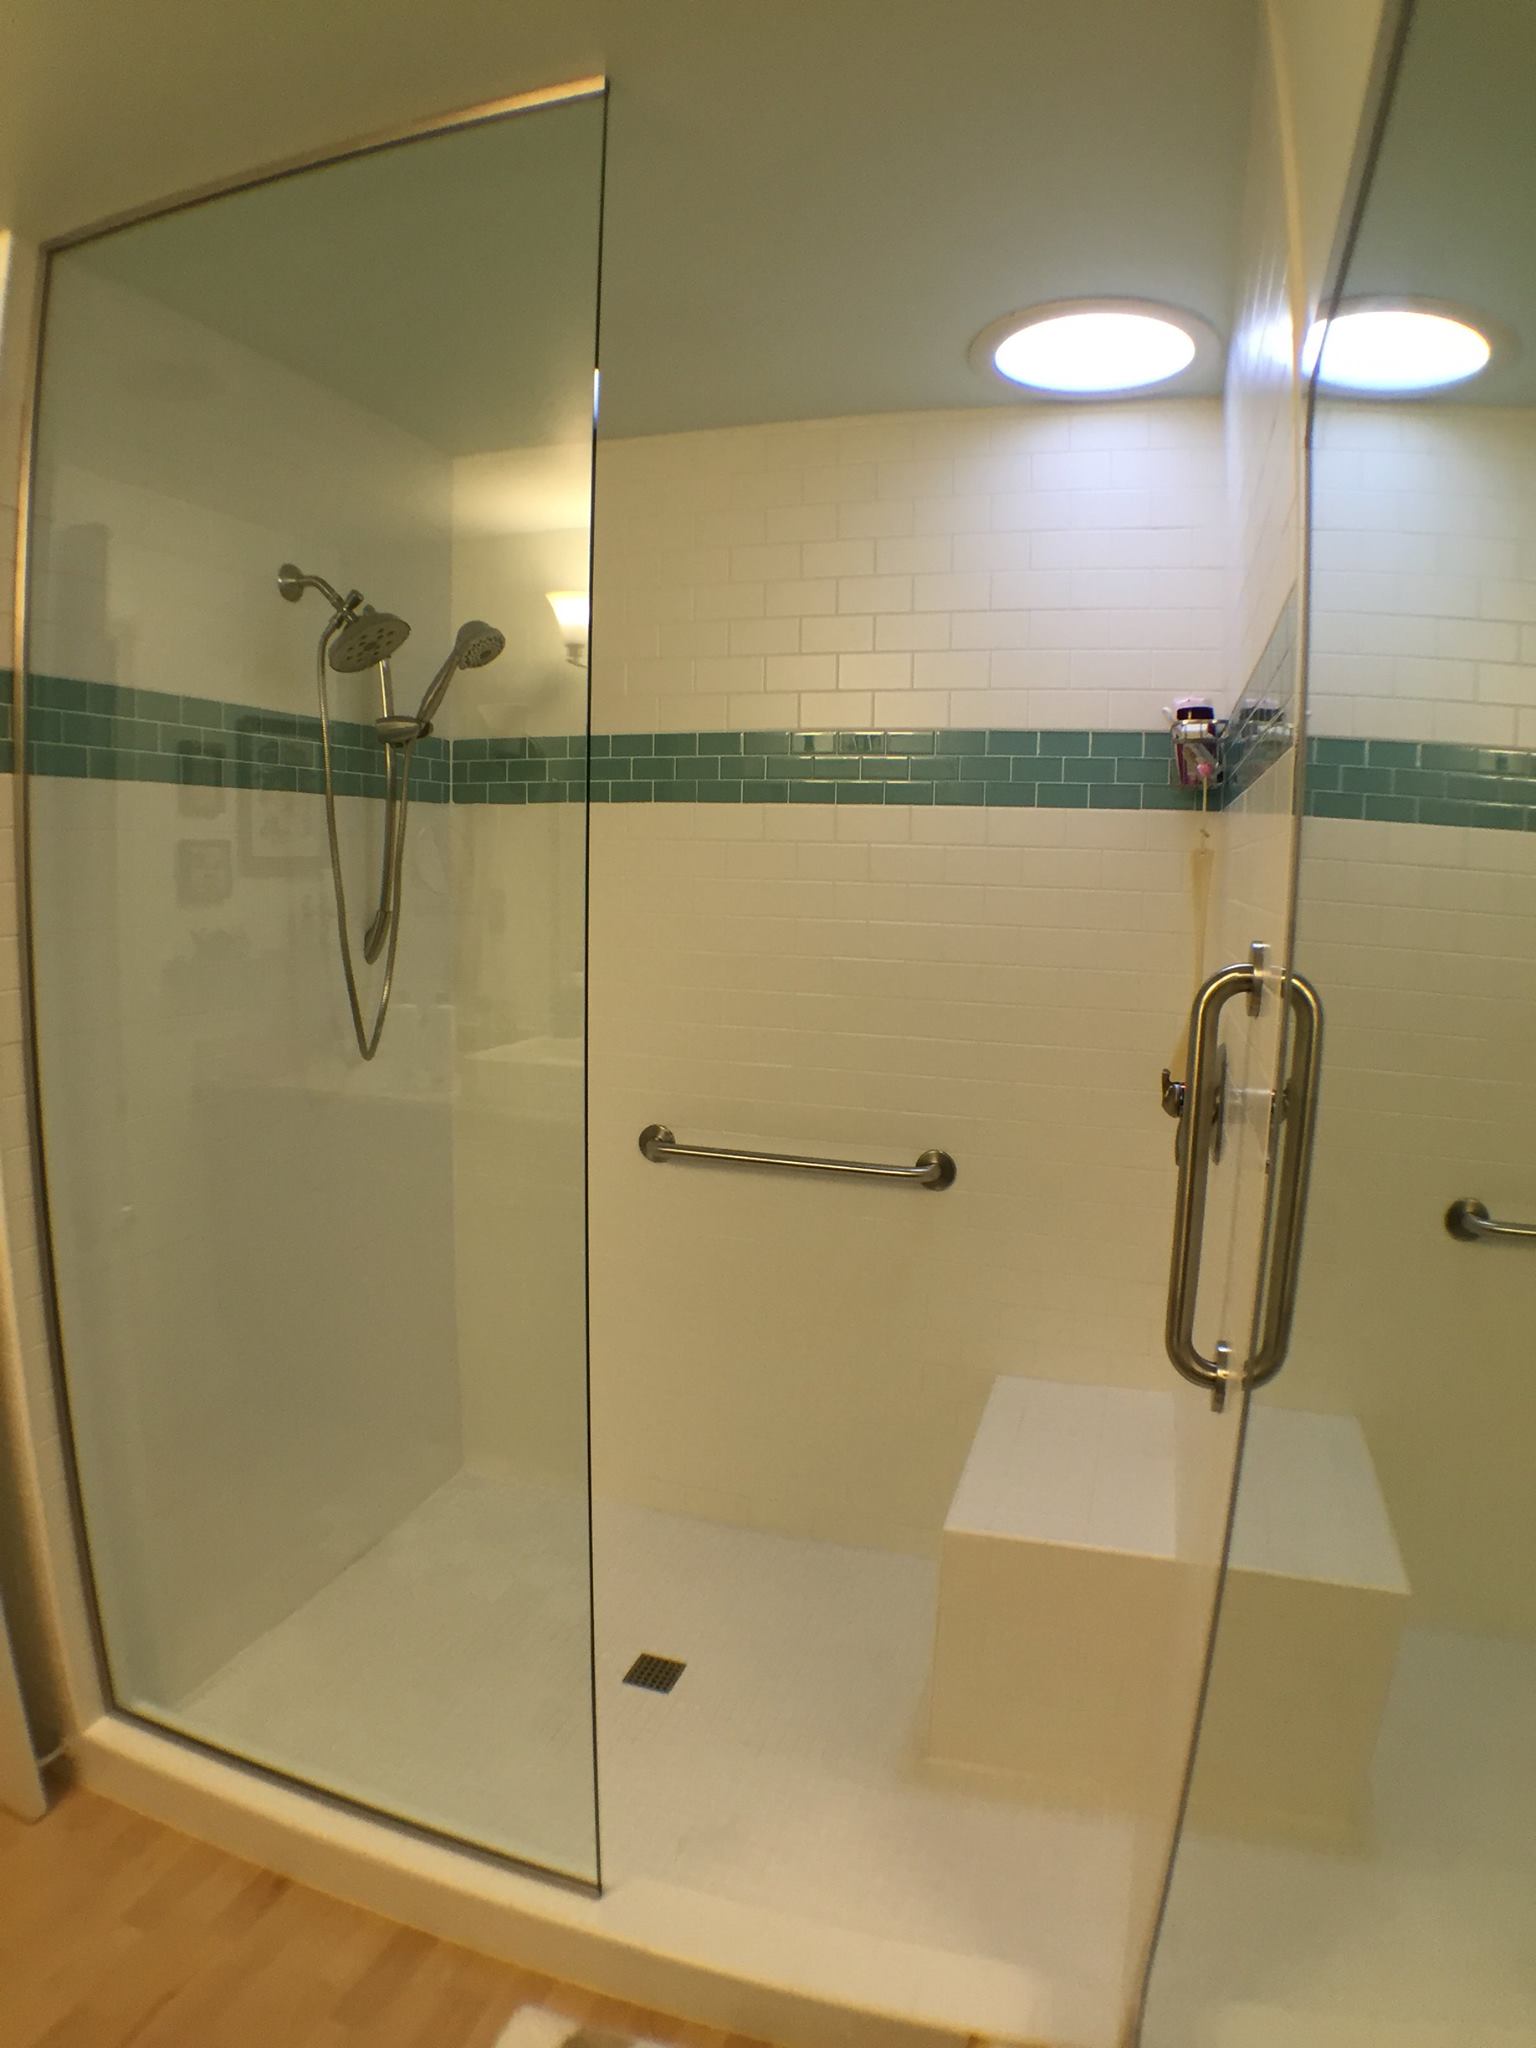 Shower with while tile walls and a strip of dark teal running through